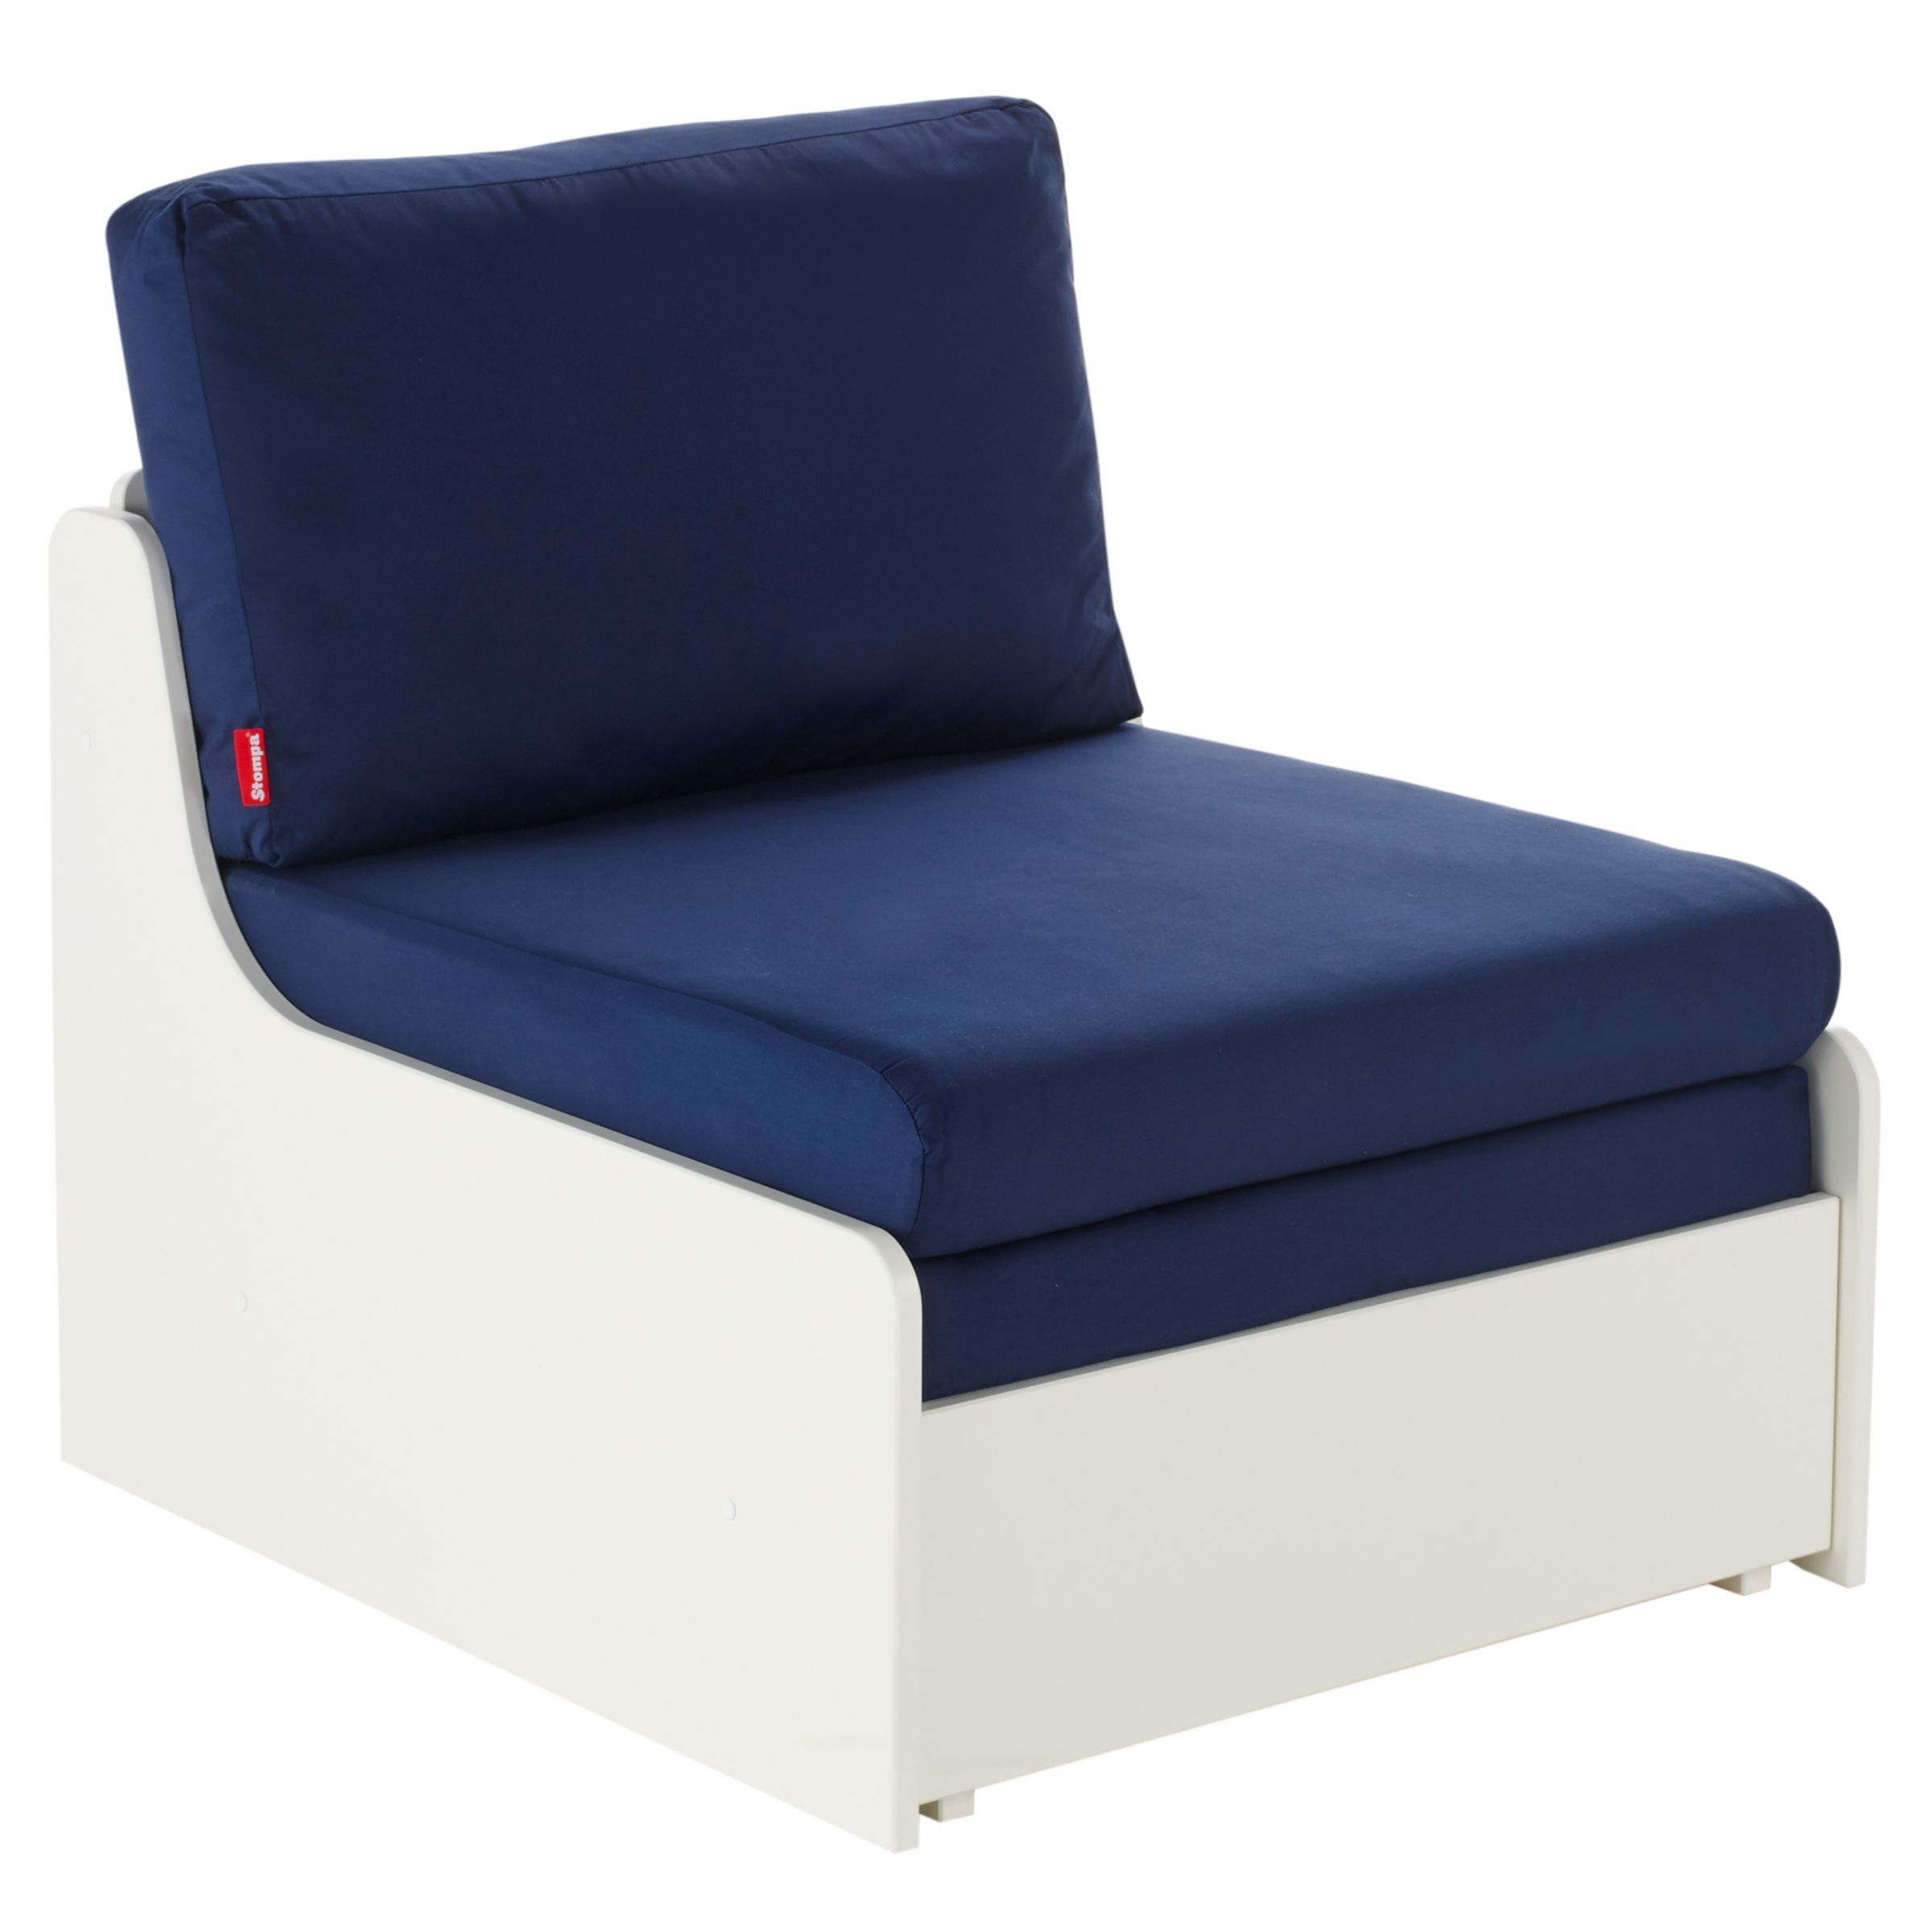 Buy Stompa Uno S Plus Single Chair Bed Online at johnlewis.com